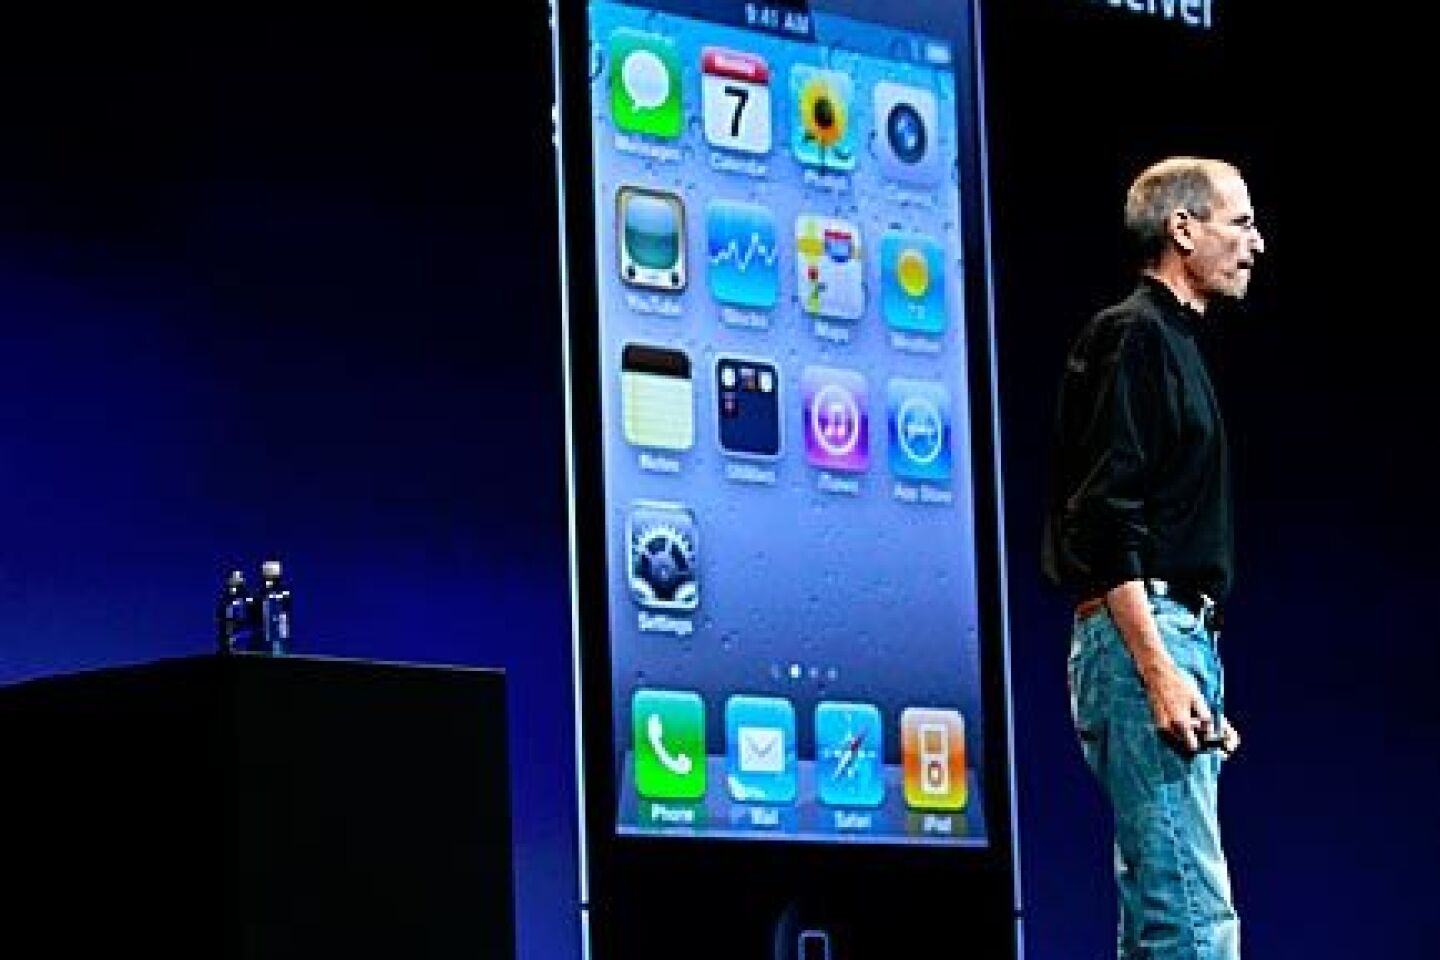 Jobs introduces the iPhone 4 at the Apple Worldwide Developers Conference. "I grew up with 'The Jetsons' and 'Star Trek,' just dreaming about video calls," Jobs told the audience. "And it's real now."